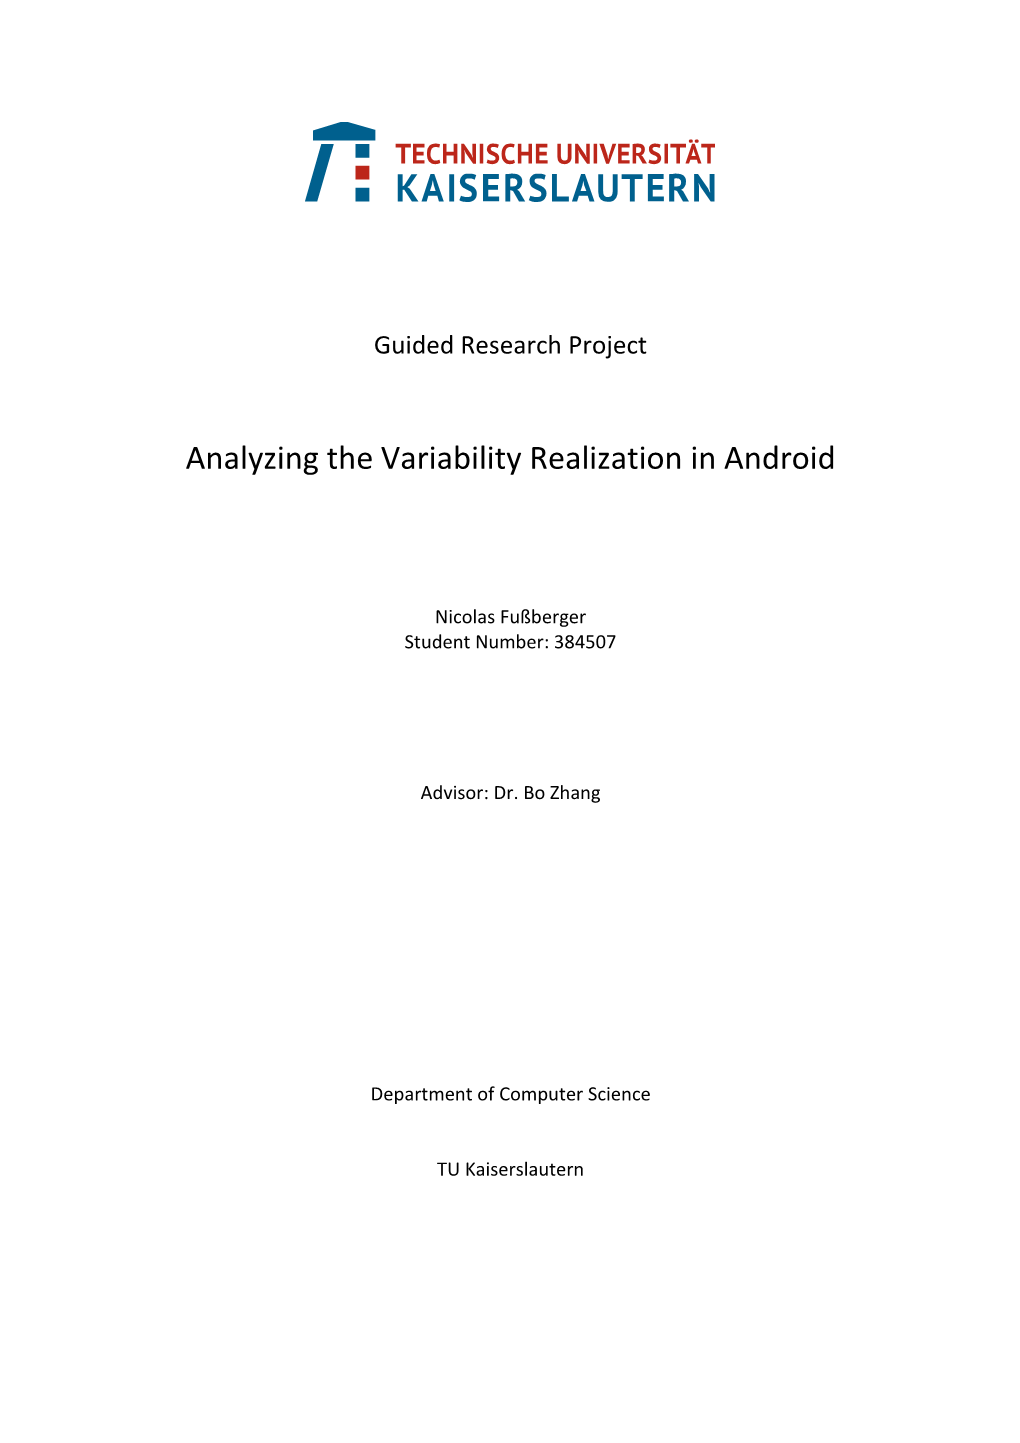 Analyzing the Variability Realization in Android